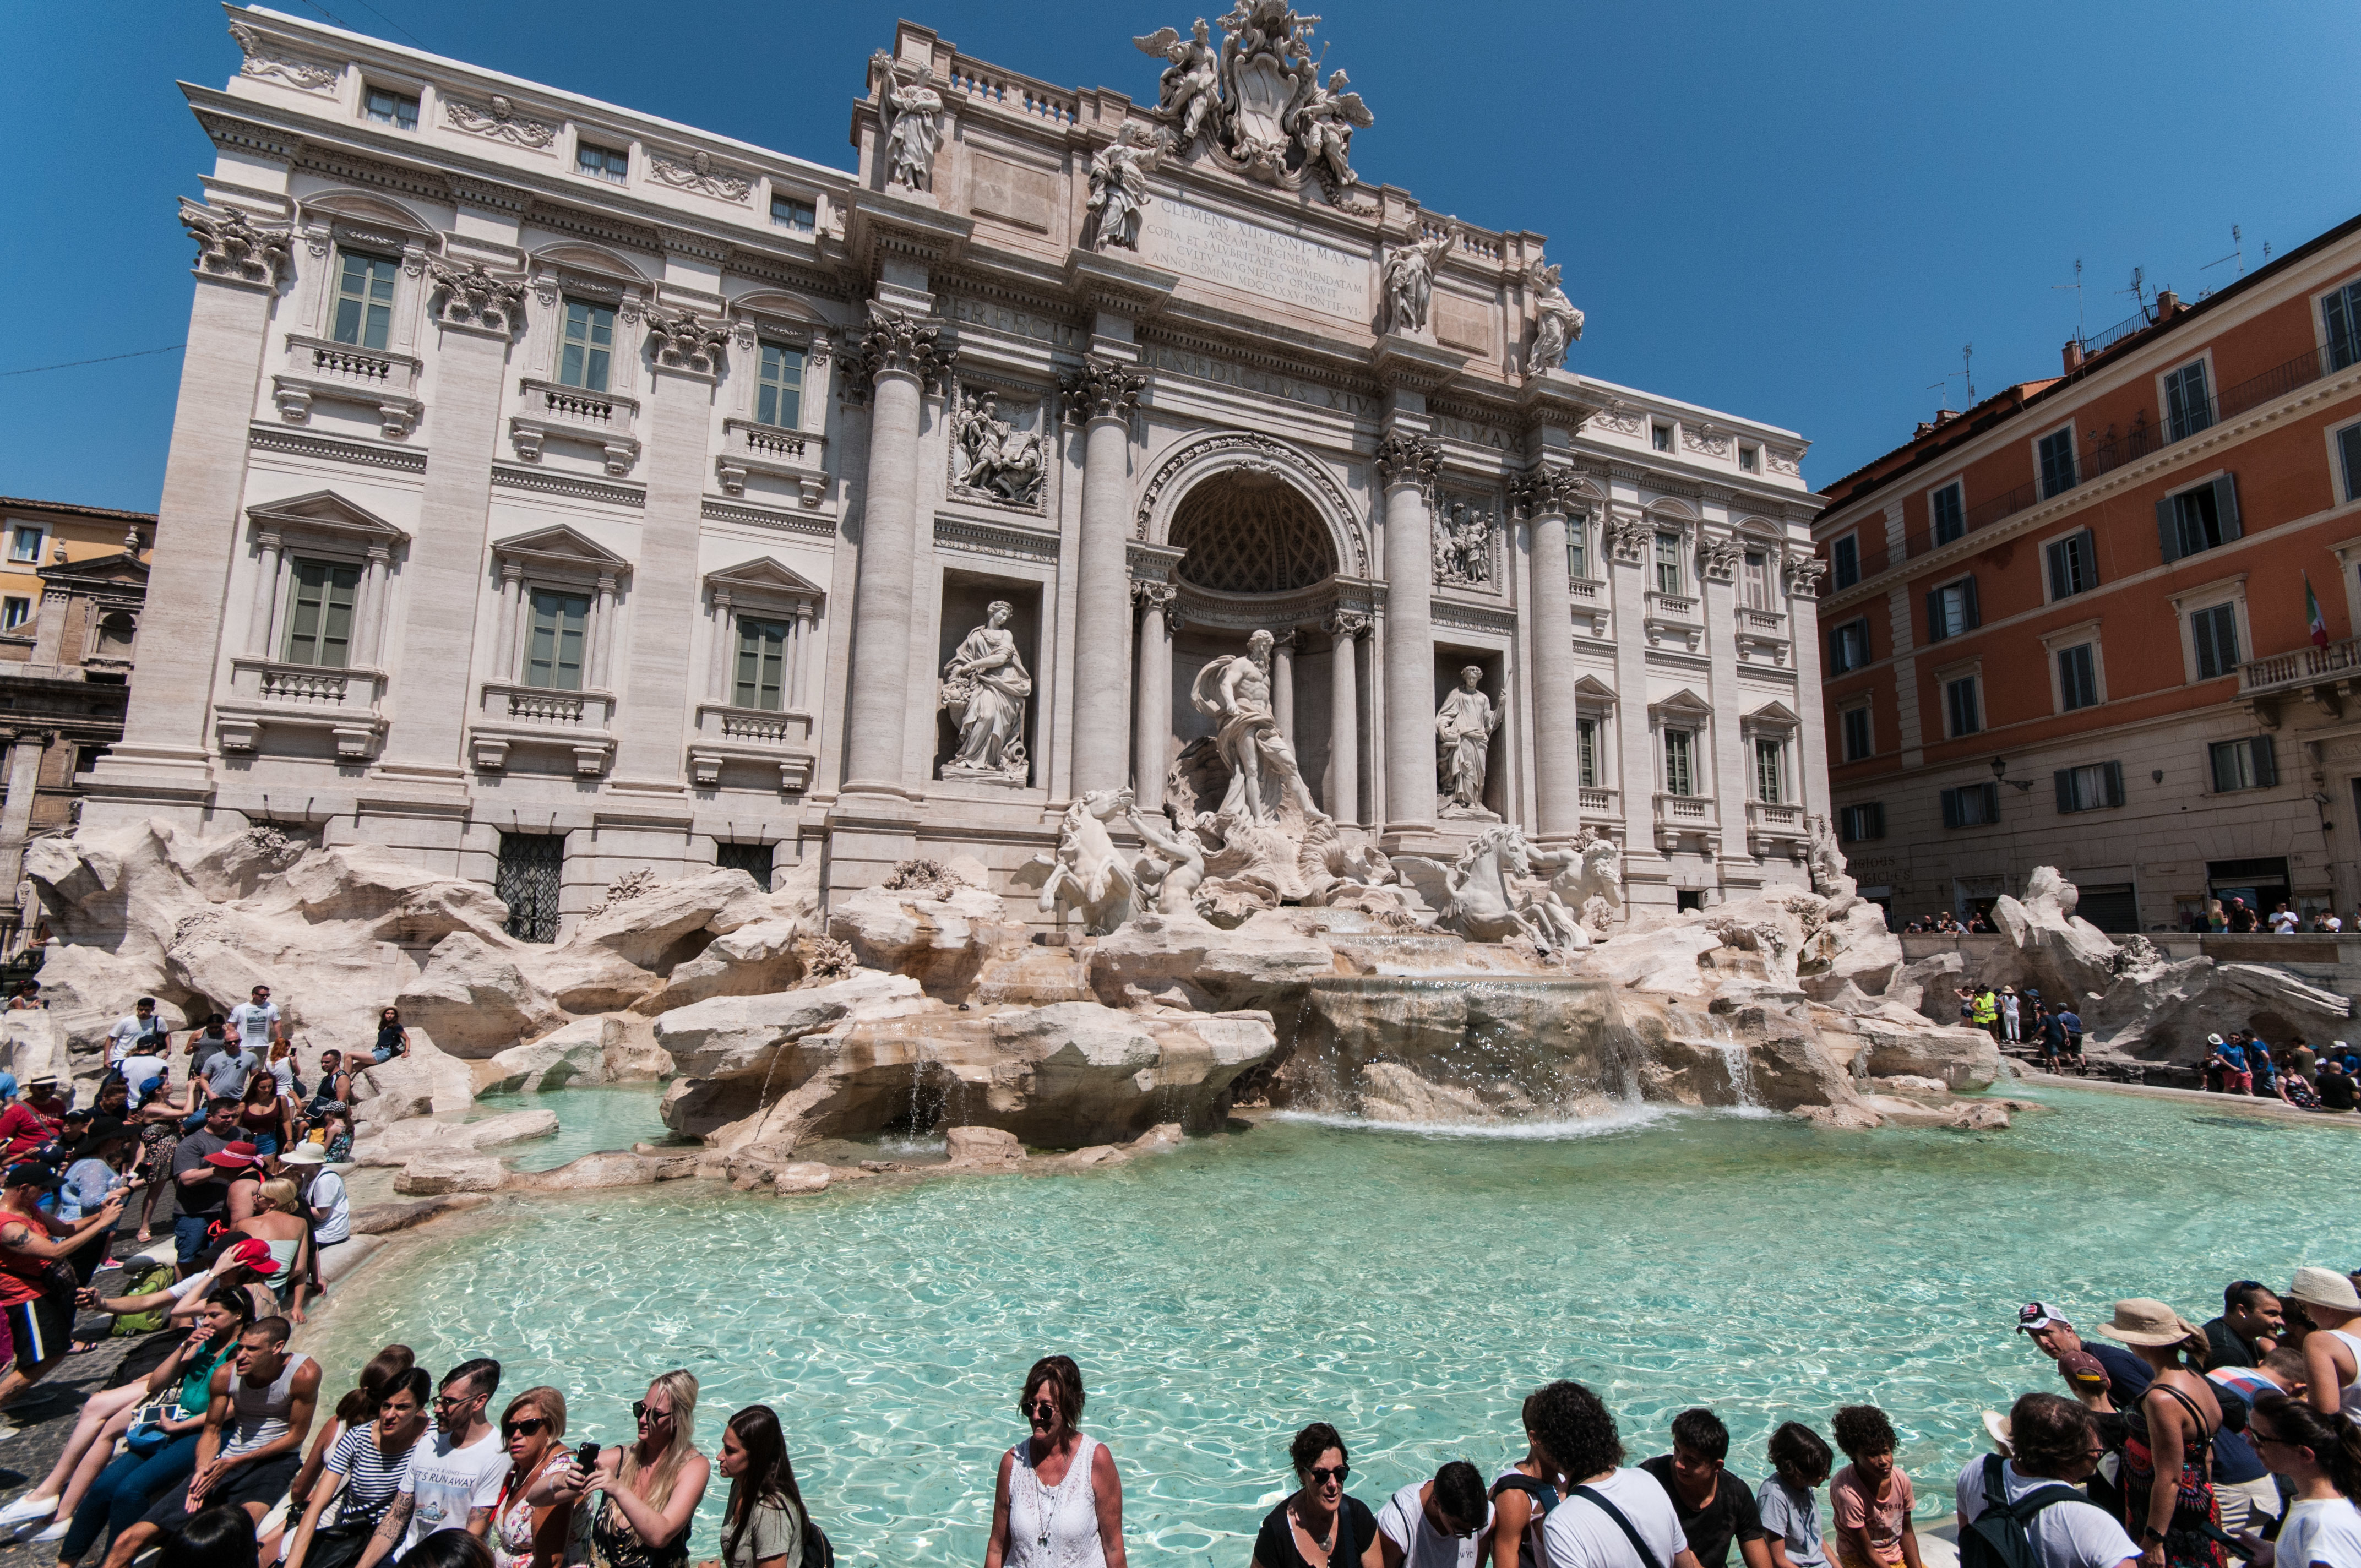 Rome: Trevi Fountain and the Pantheon